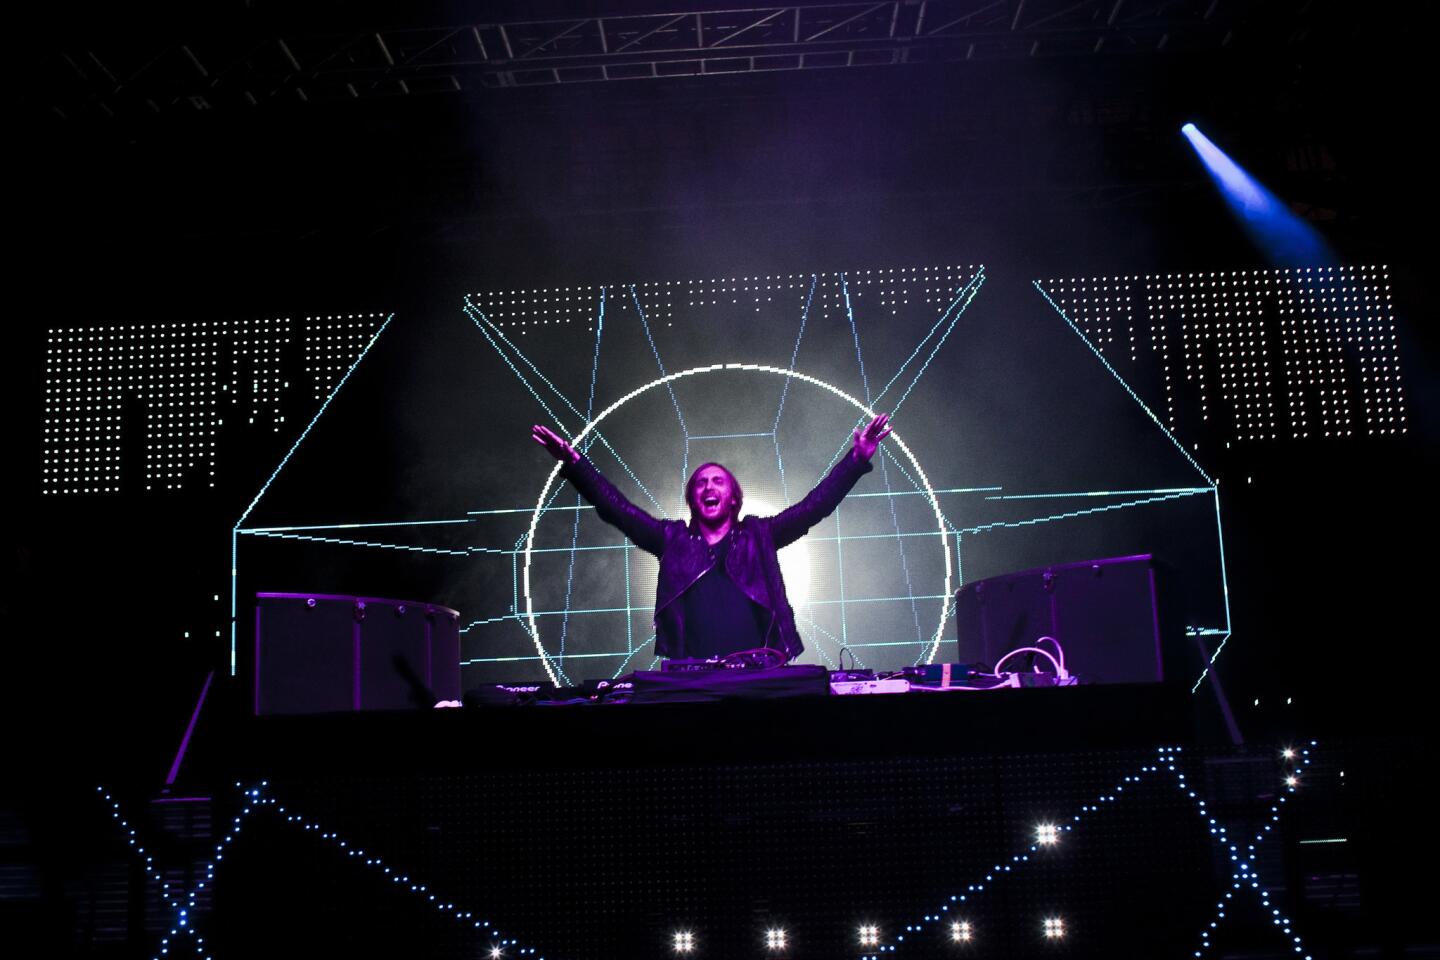 David Guetta performed his DJ set in the Sahara tent on the second day of week two of the Coachella Valley Music and Arts Festival, 2012.